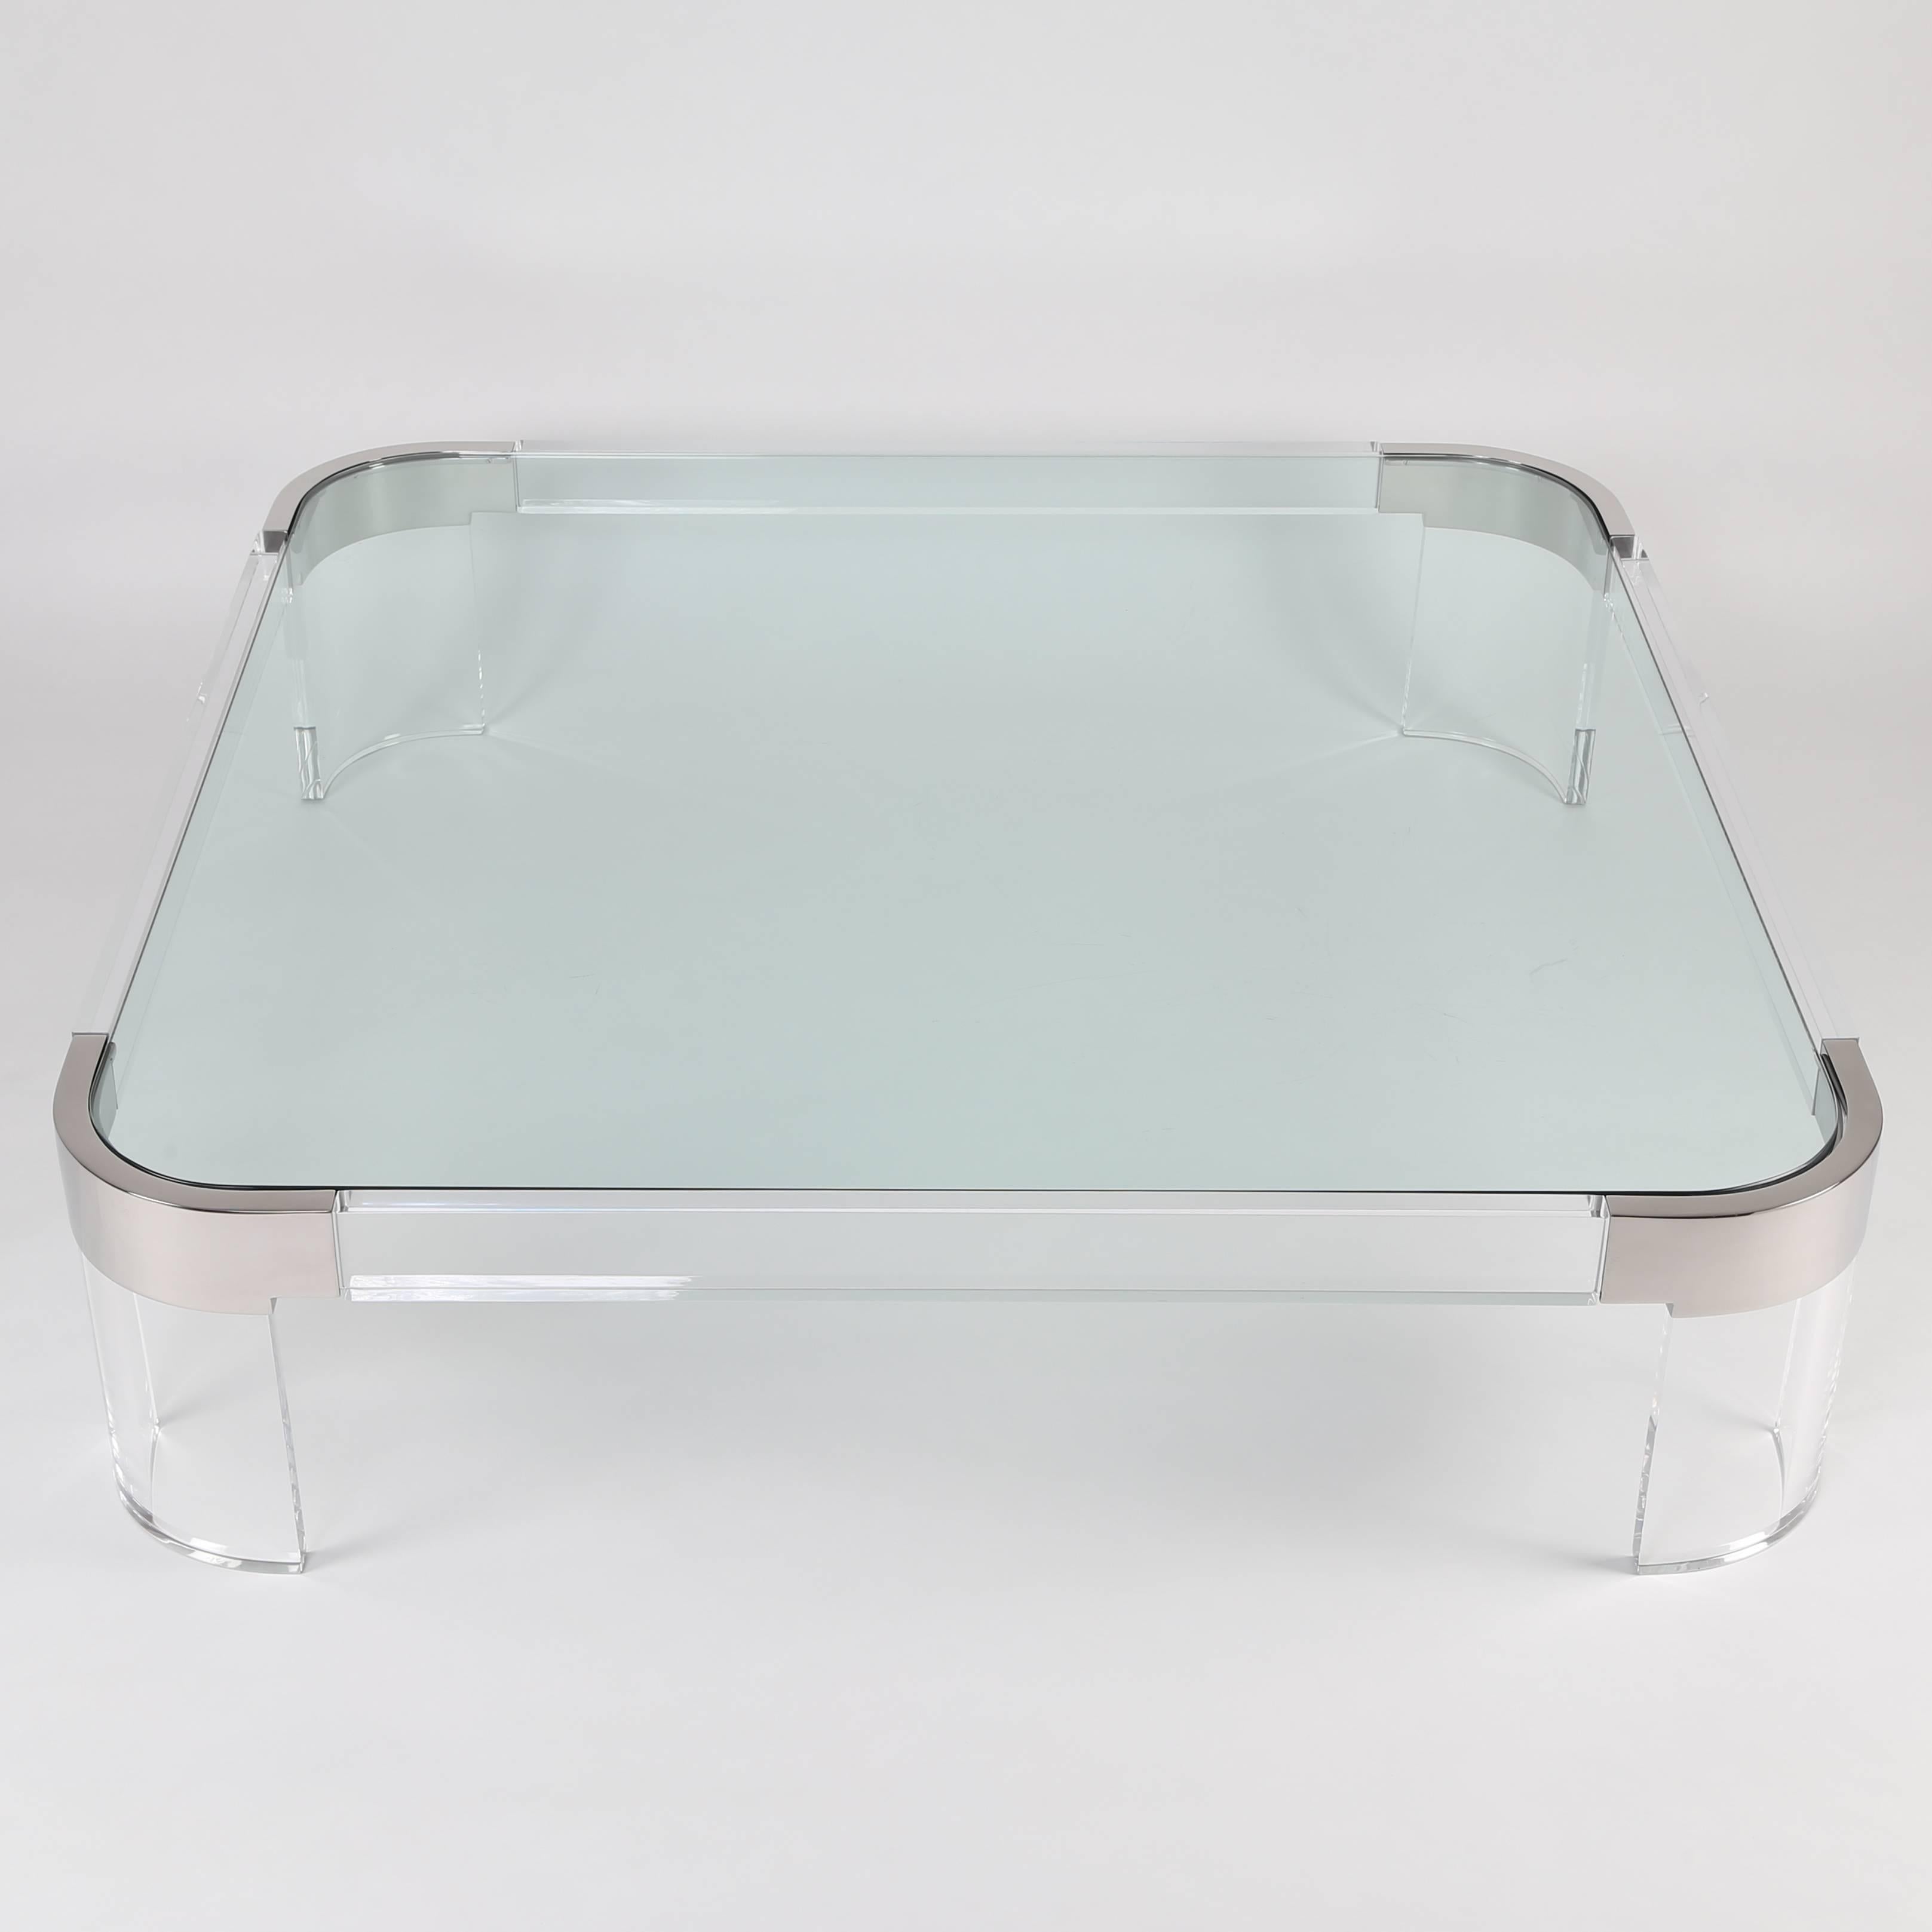 Sleek square coffee table made of thick Lucite, plate glass and polished stainless steel by Charles Hollis Jones. Curved Lucite legs and slab Lucite sides attach with hidden hardware to four stainless-steel corner brackets. An inset 1/2-inch-thick